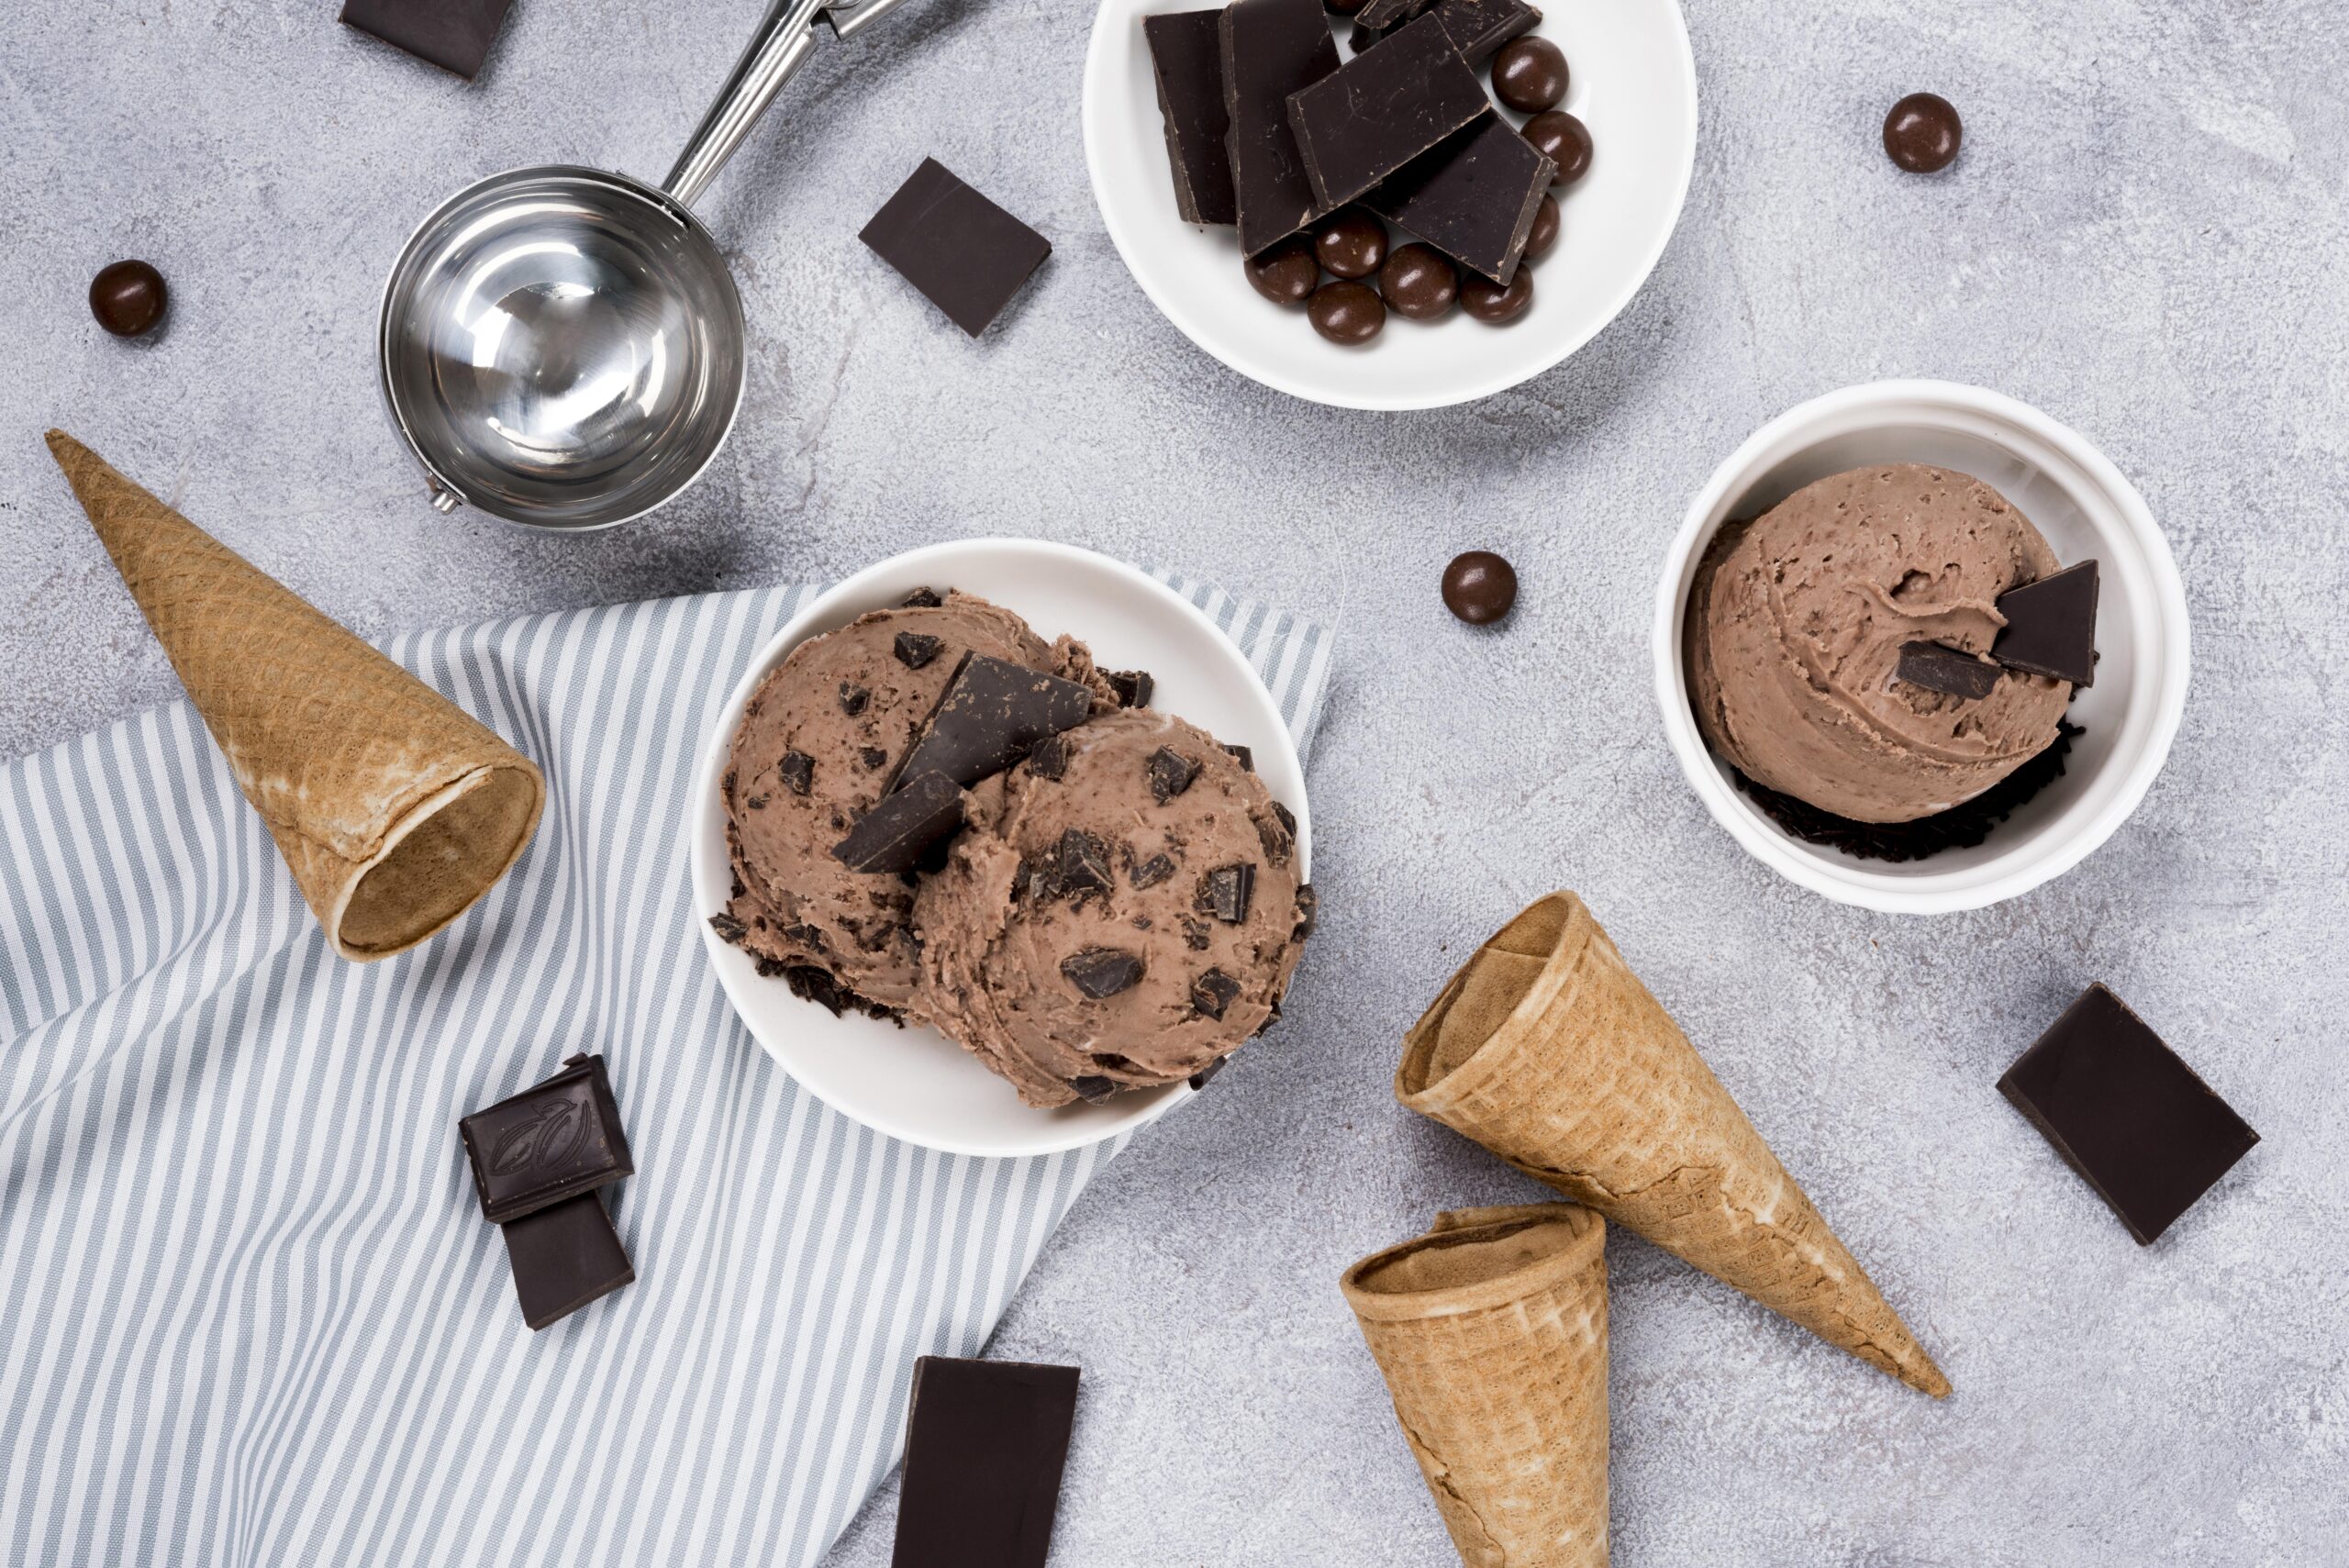 How to Make Belgian Chocolate Chip Ice Cream at Home